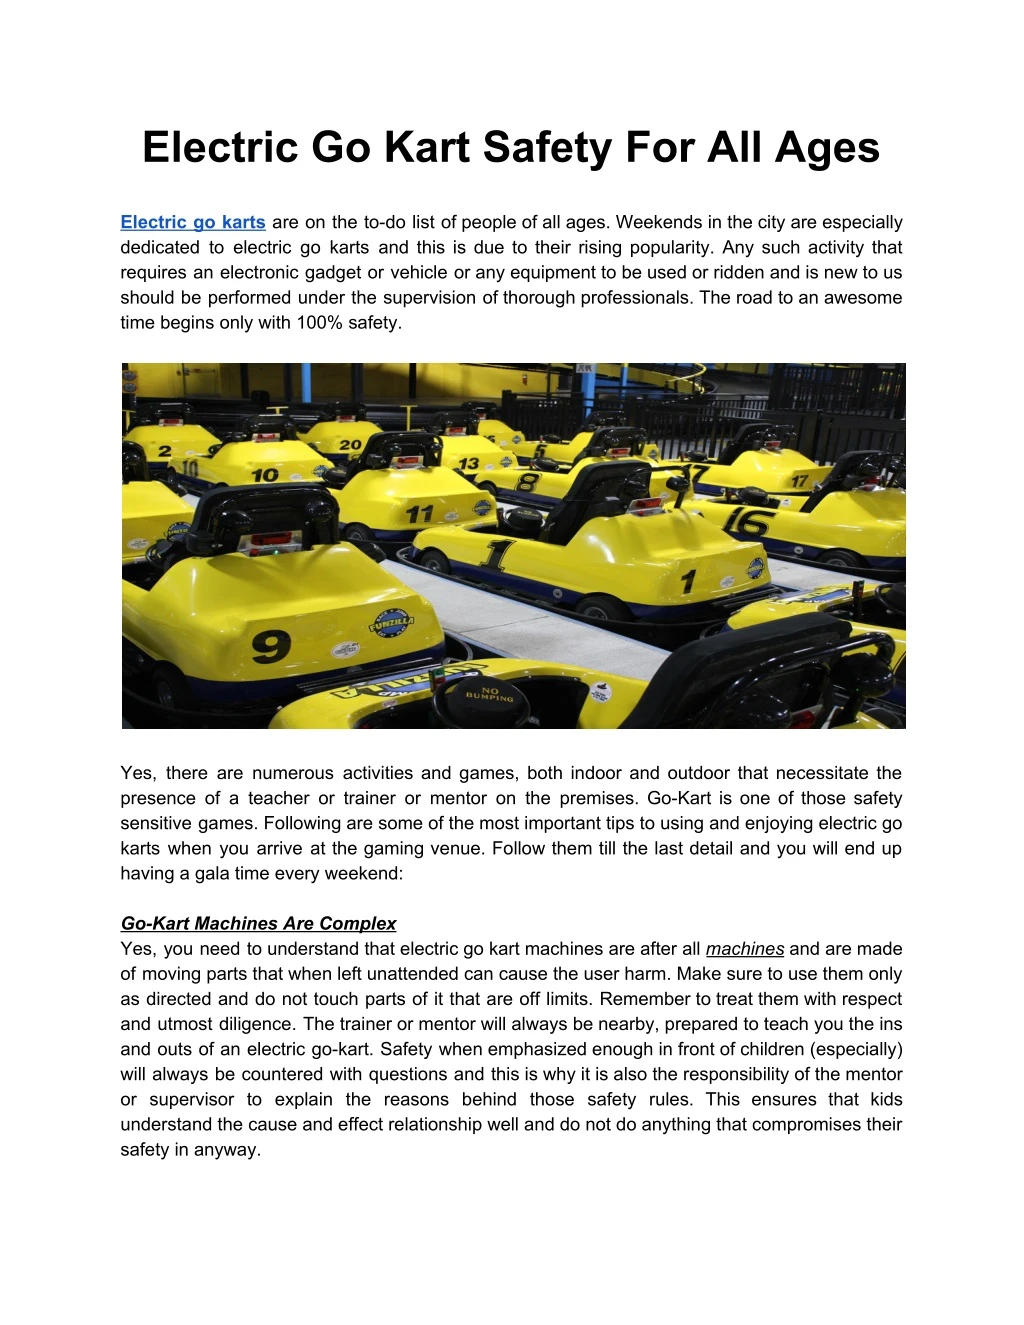 electric go kart safety for all ages